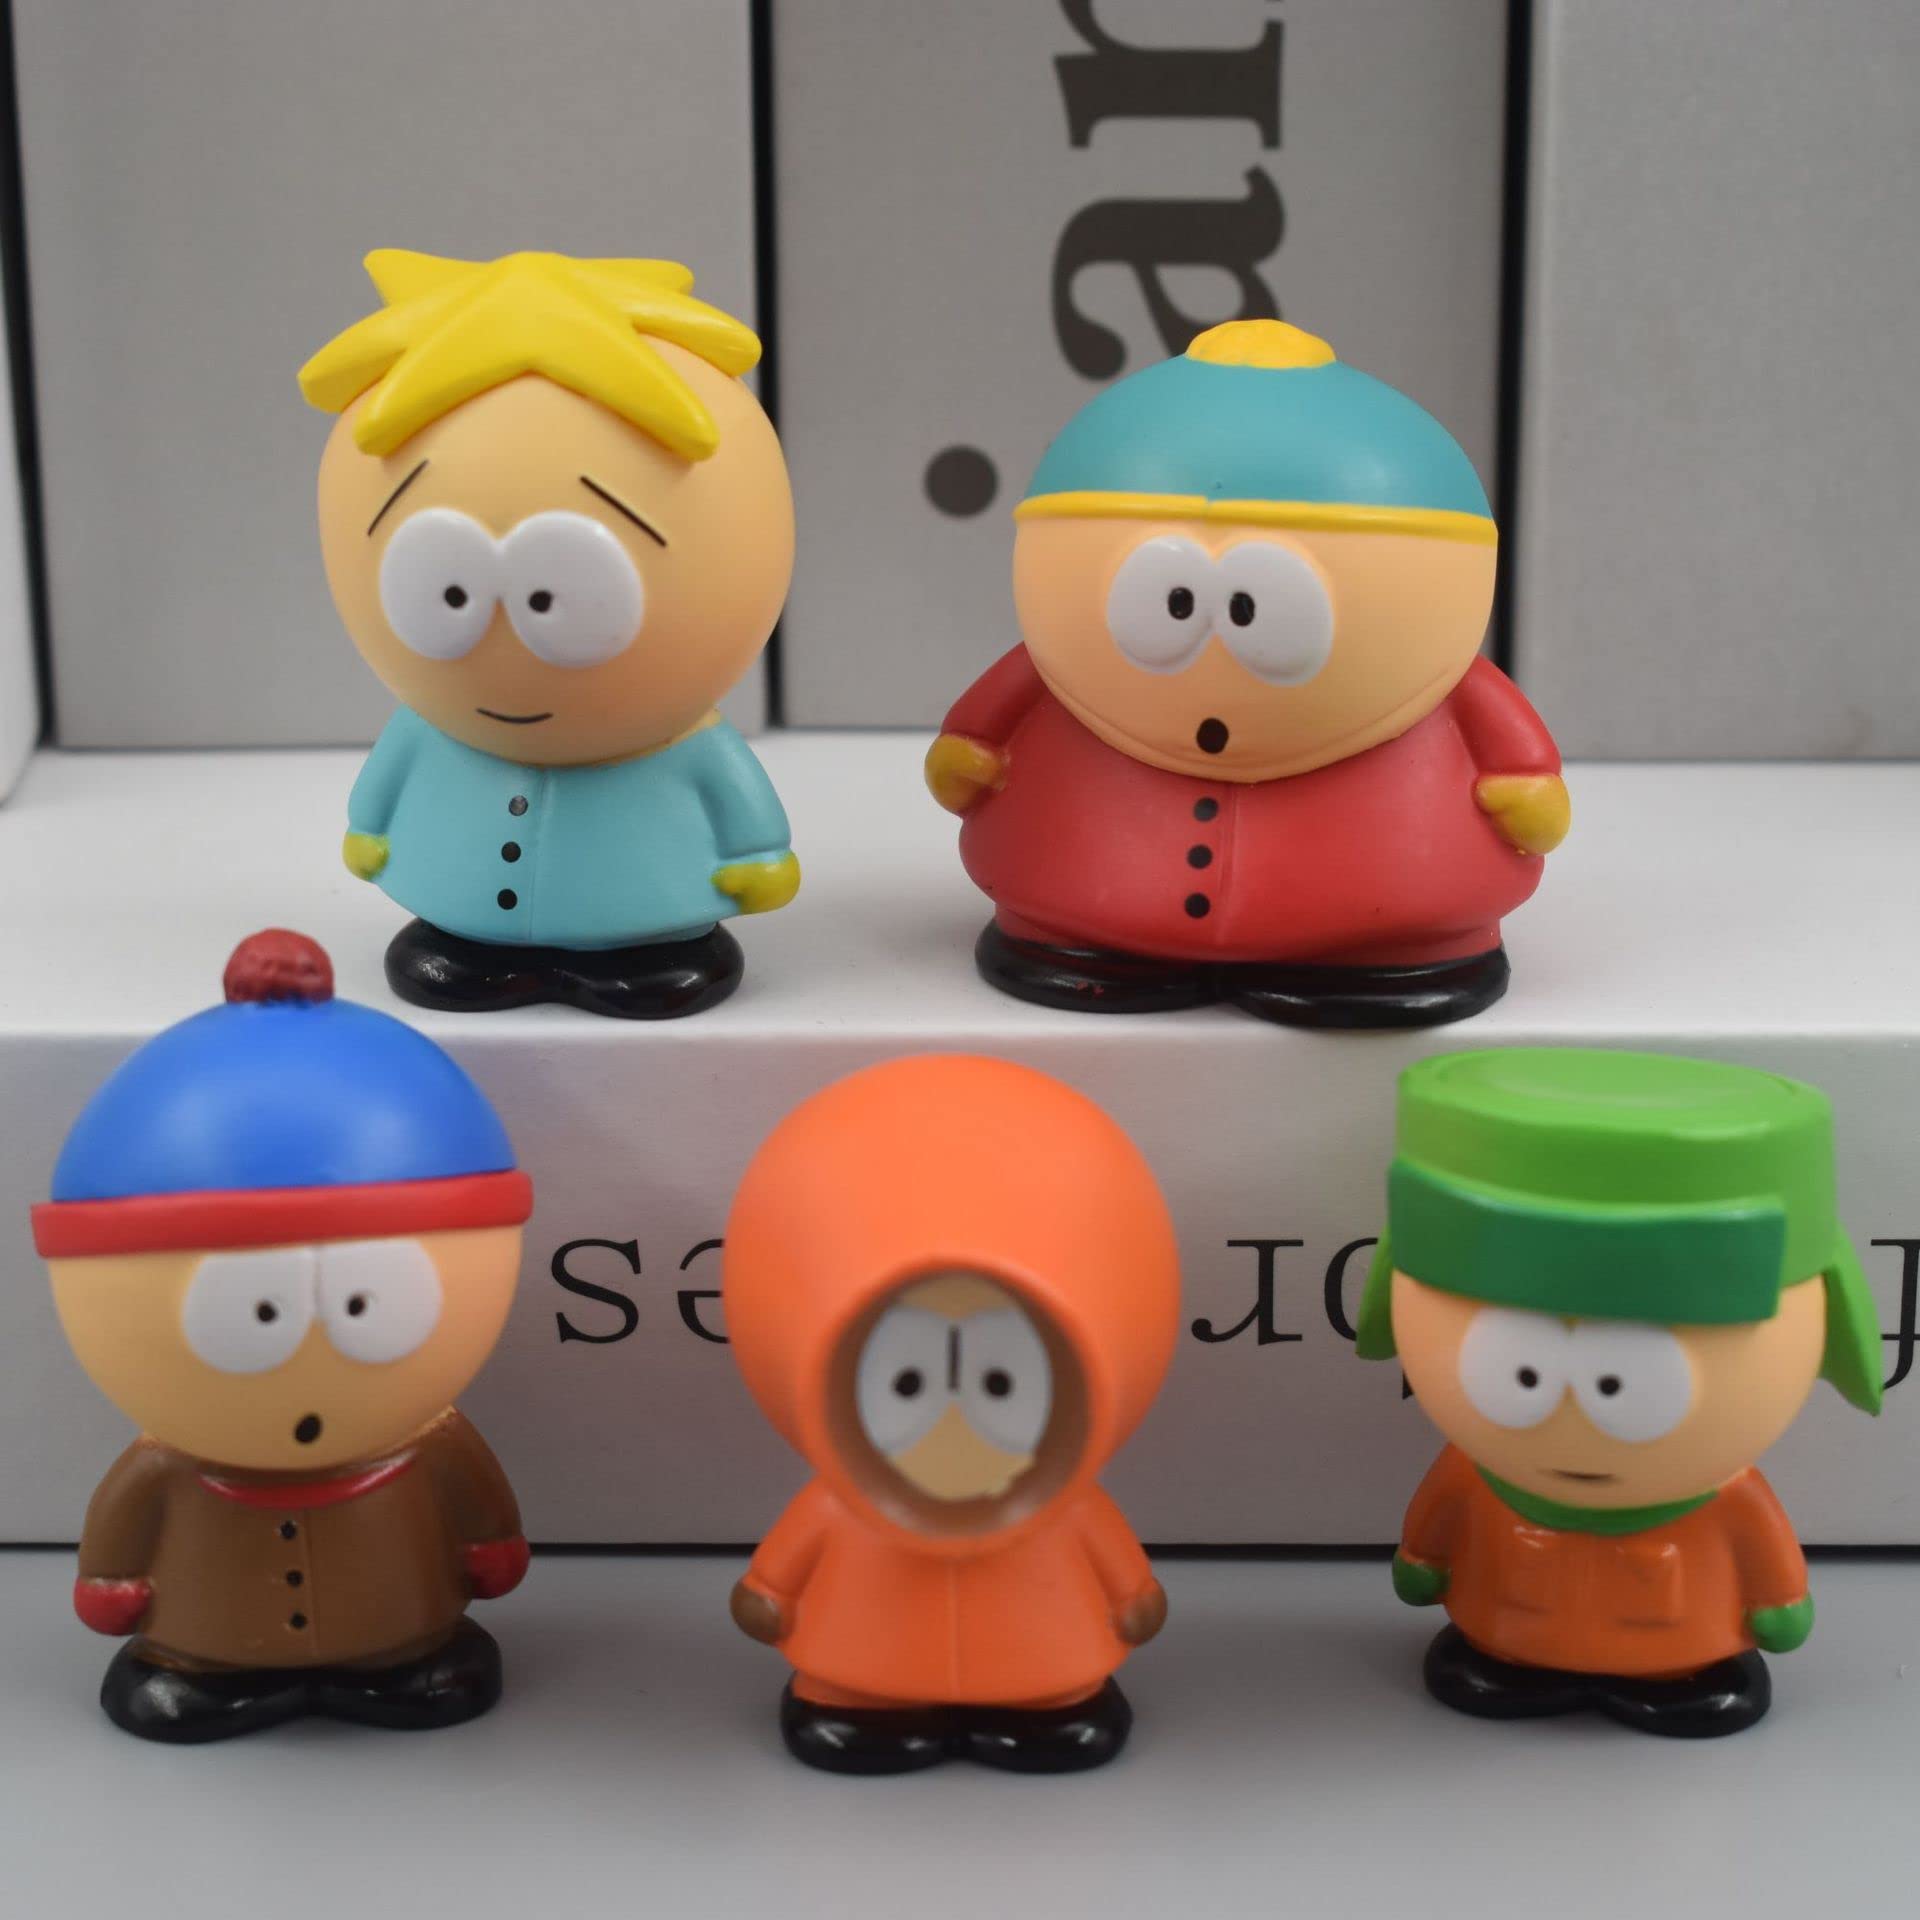 Risewill South Park Plush Toy, South Park Merchandise Plush Figure, Kyle  Cartman Kenny Stan Butters Plush Doll, Stuffed Ornaments Gift for Christmas  Birthday, Anime Cartoon Fans Kids Adults - Walmart.com